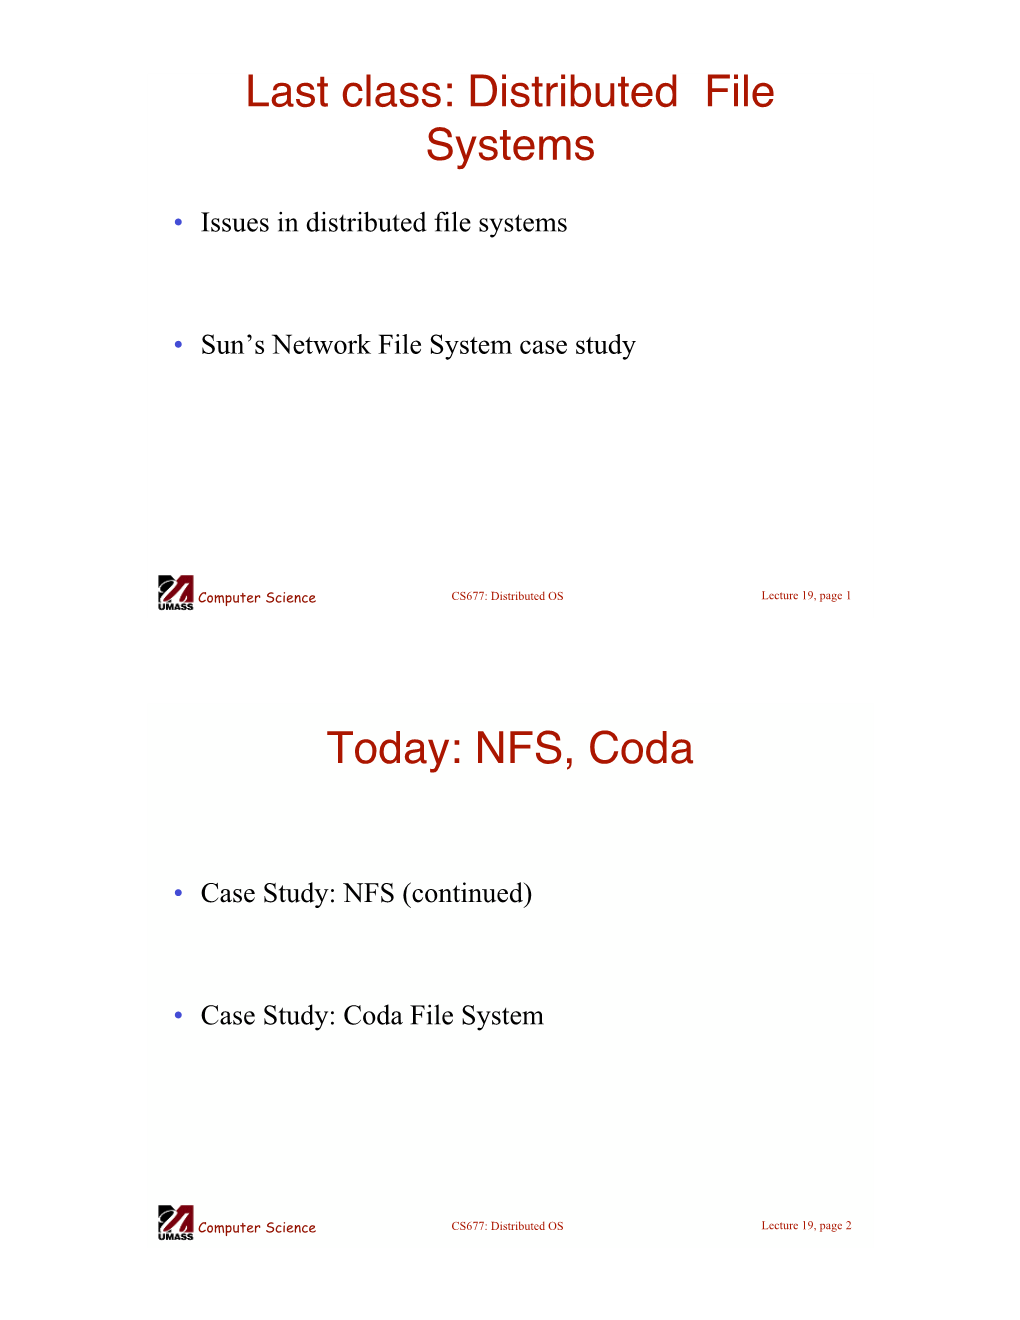 Distributed File Systems: Coda